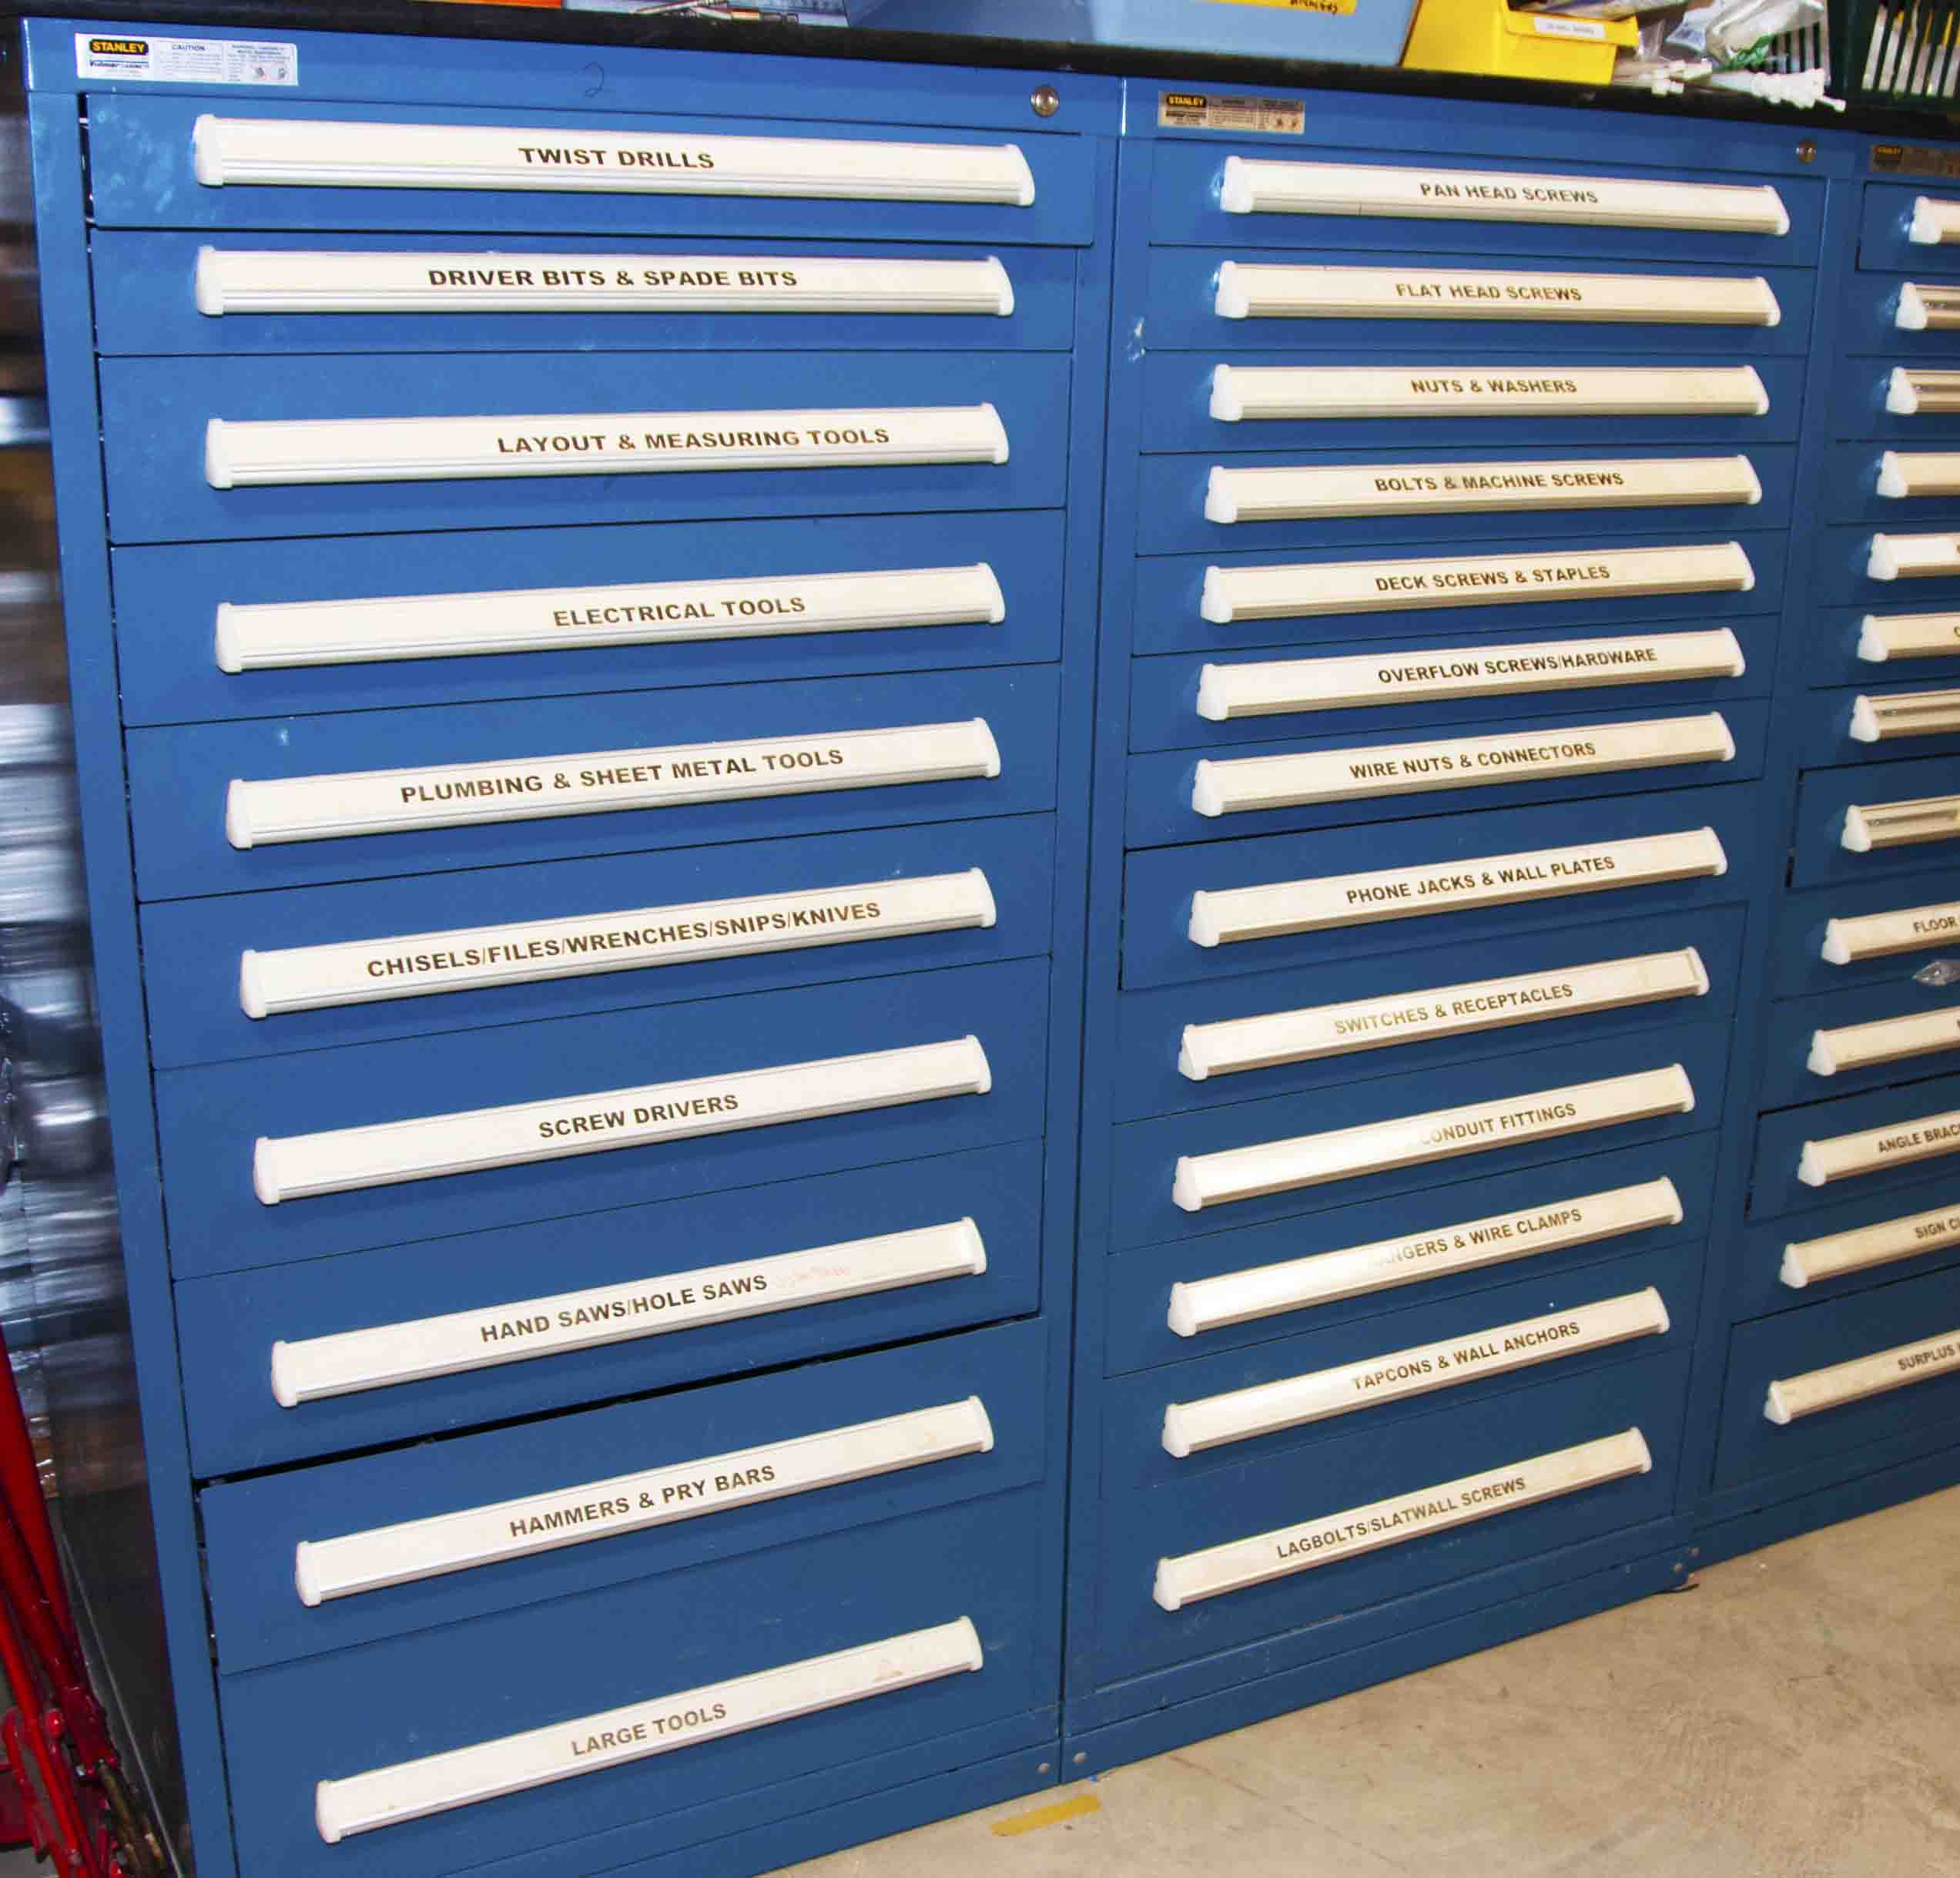 Members have access to fully stocked tool cabinets with everything you 